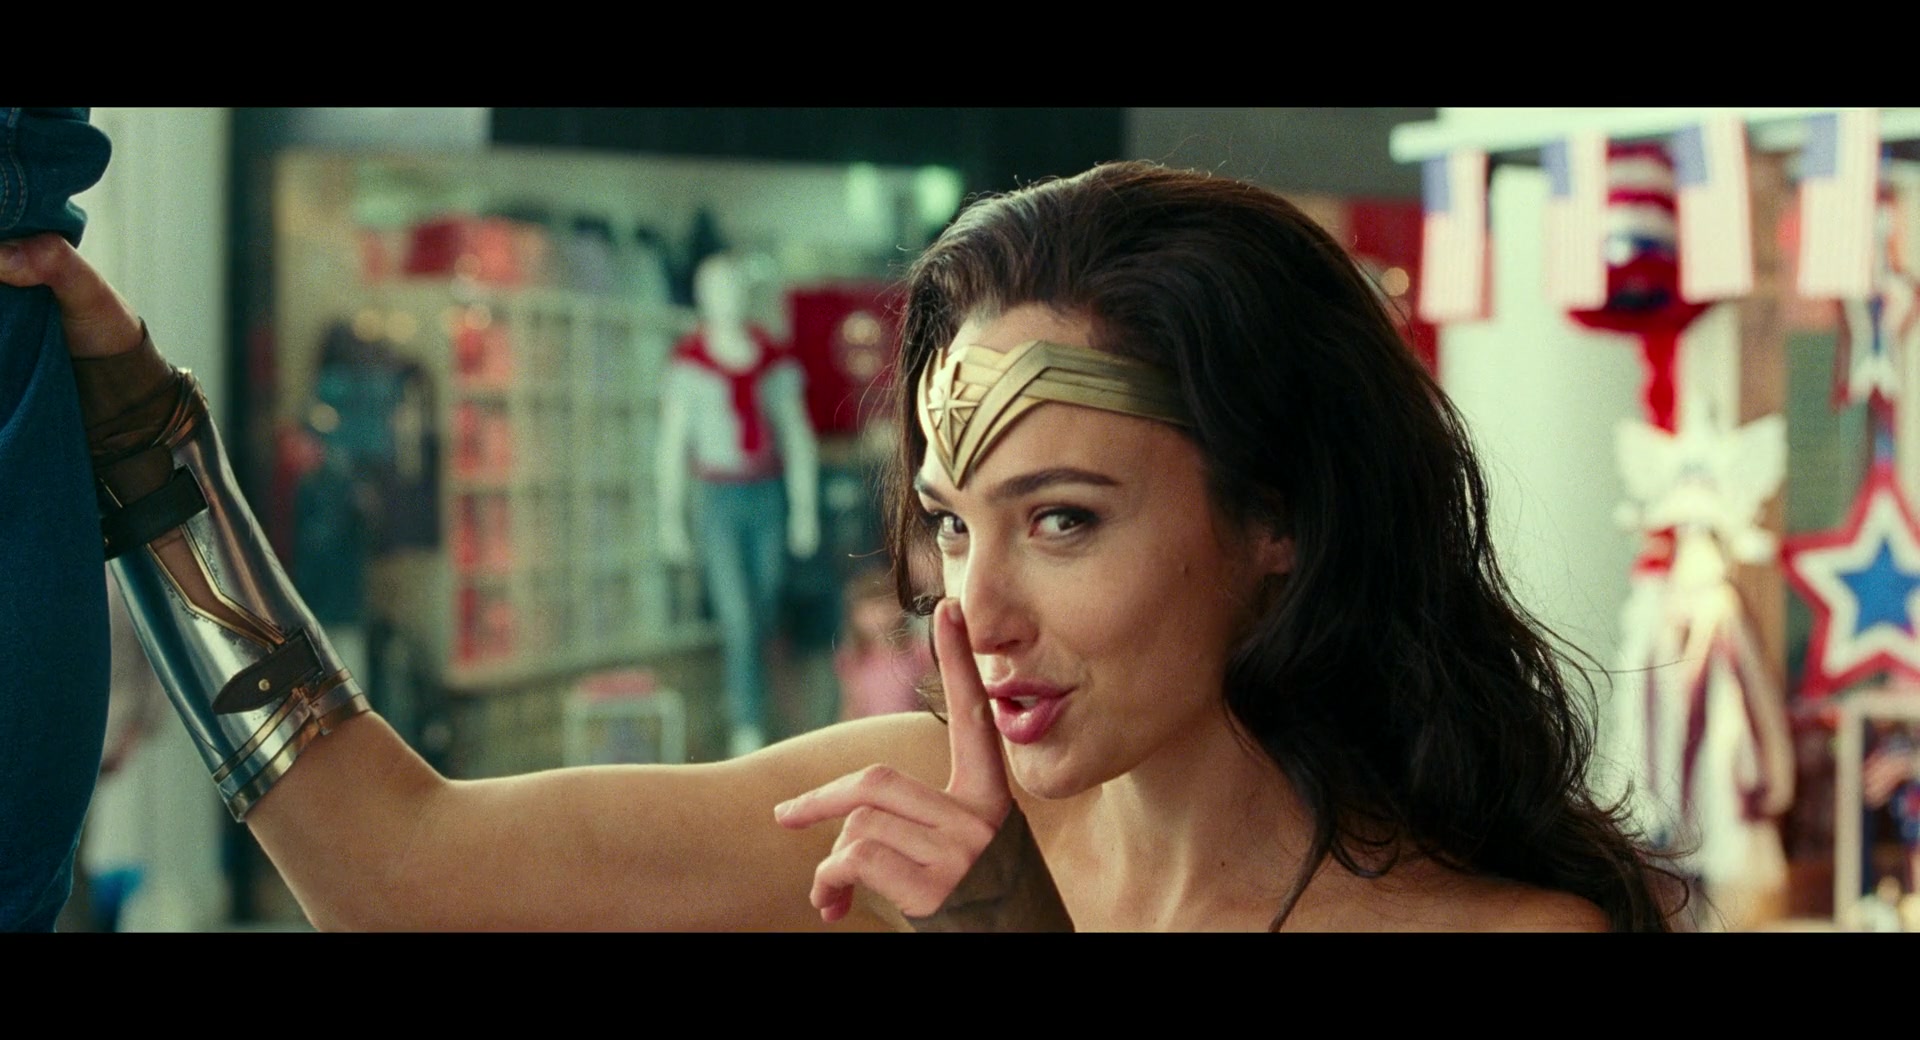 Wonder Woman (Gal Gadot) entrusts a young fan with her secret in Wonder Woman (Gal Gadot) finally learns to fly in Wonder Woman 1984 (2020), Warner Bros. Pictures via Blu-ray